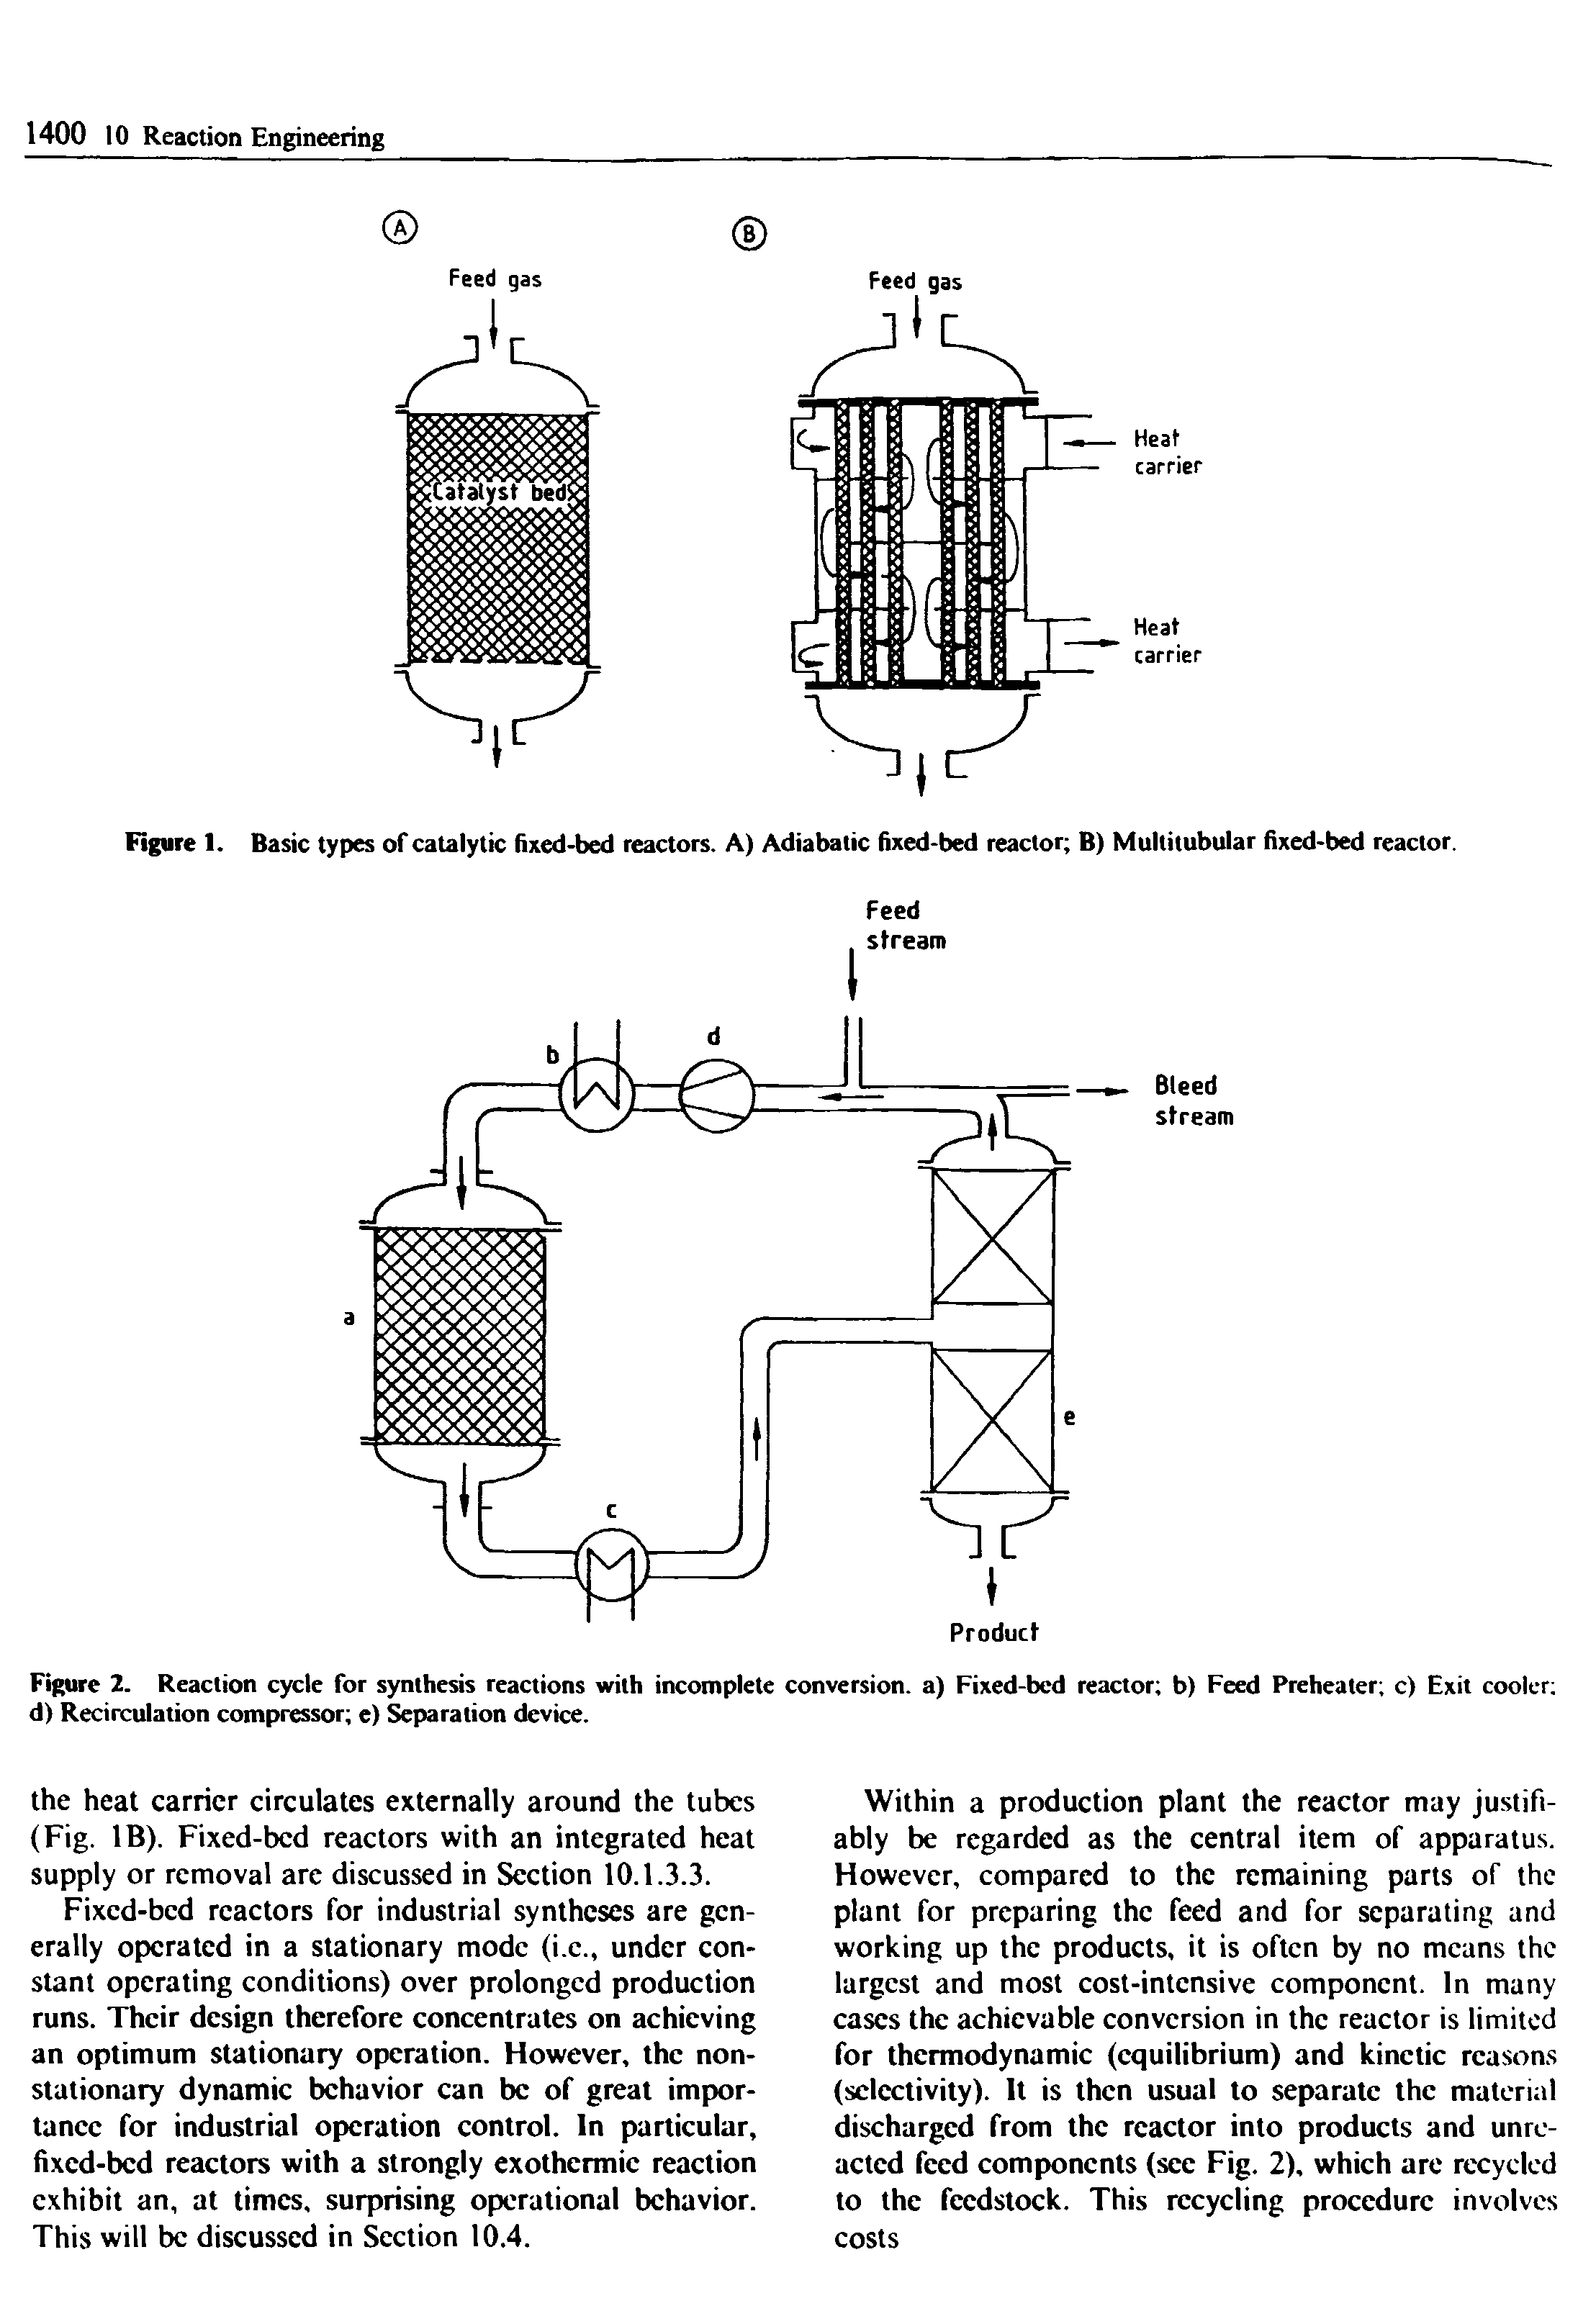 Figure 1. Basic types of catalytic fixed-bed reactors. A) Adiabatic fixed-bed reactor B) Multitubular fixed-bed reactor.